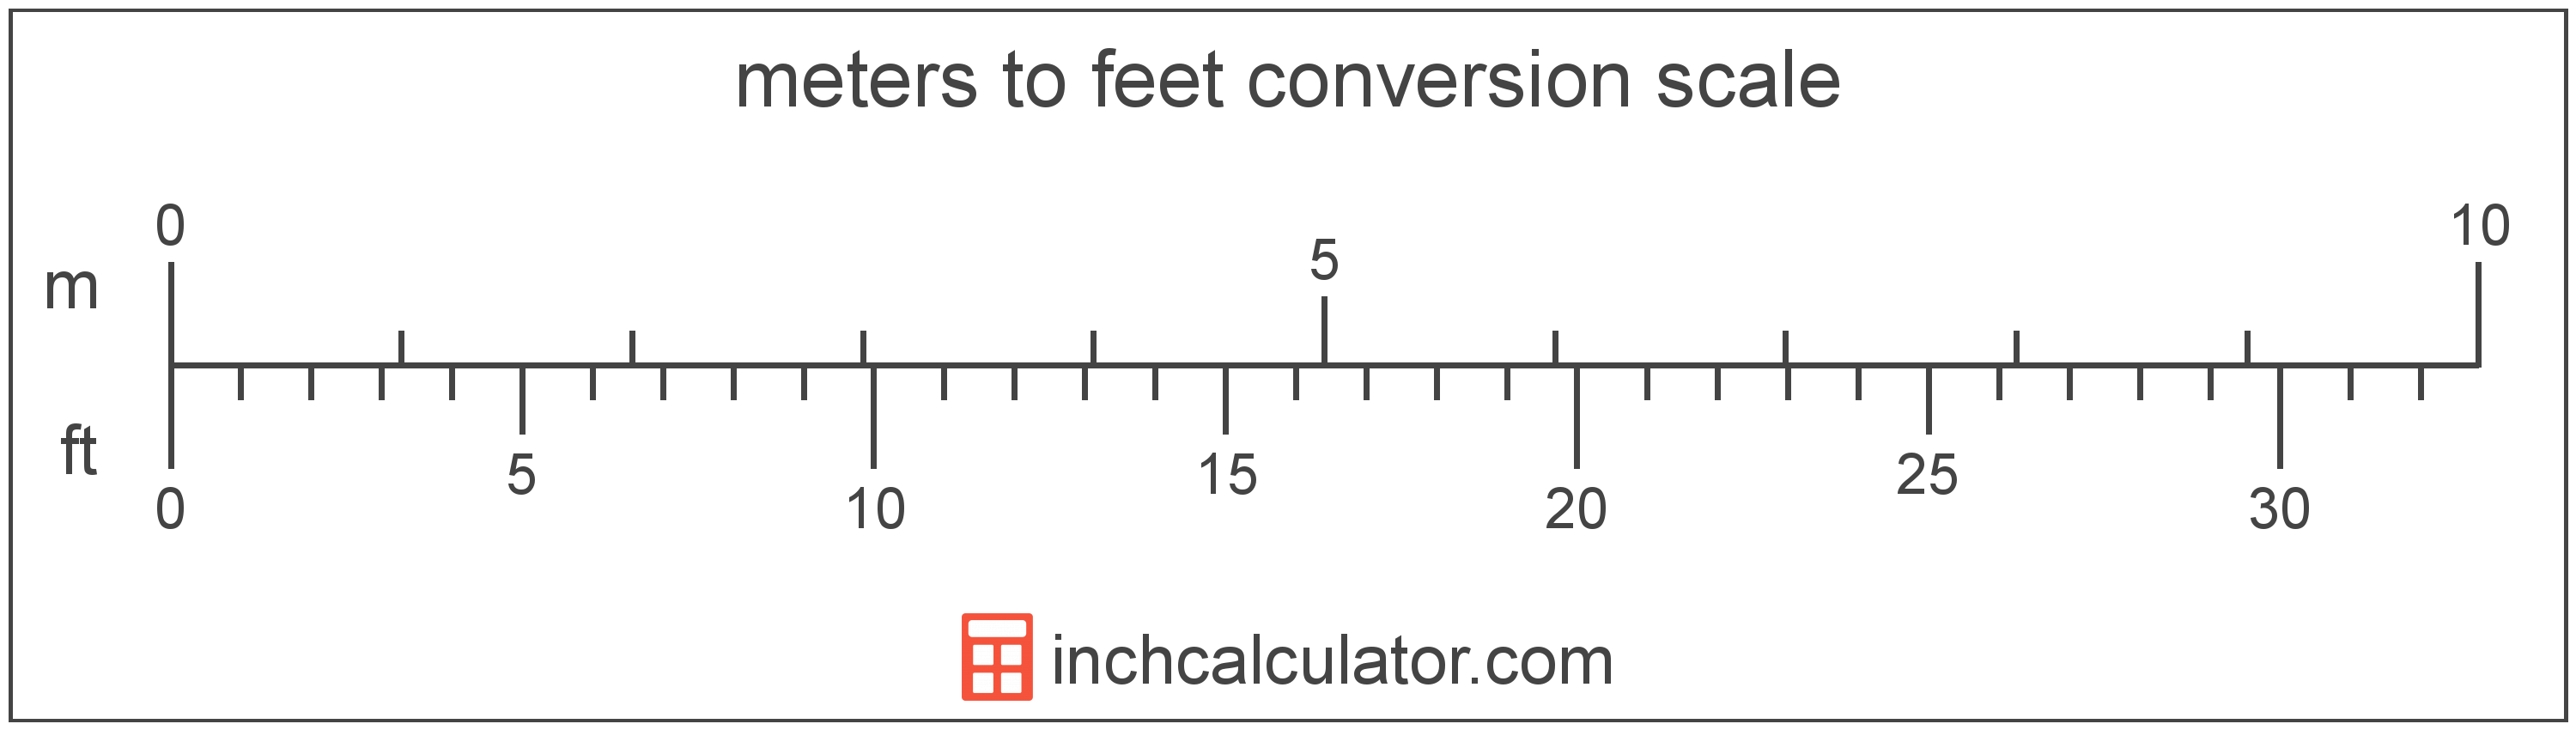 conversion scale showing meters and equivalent feet length values